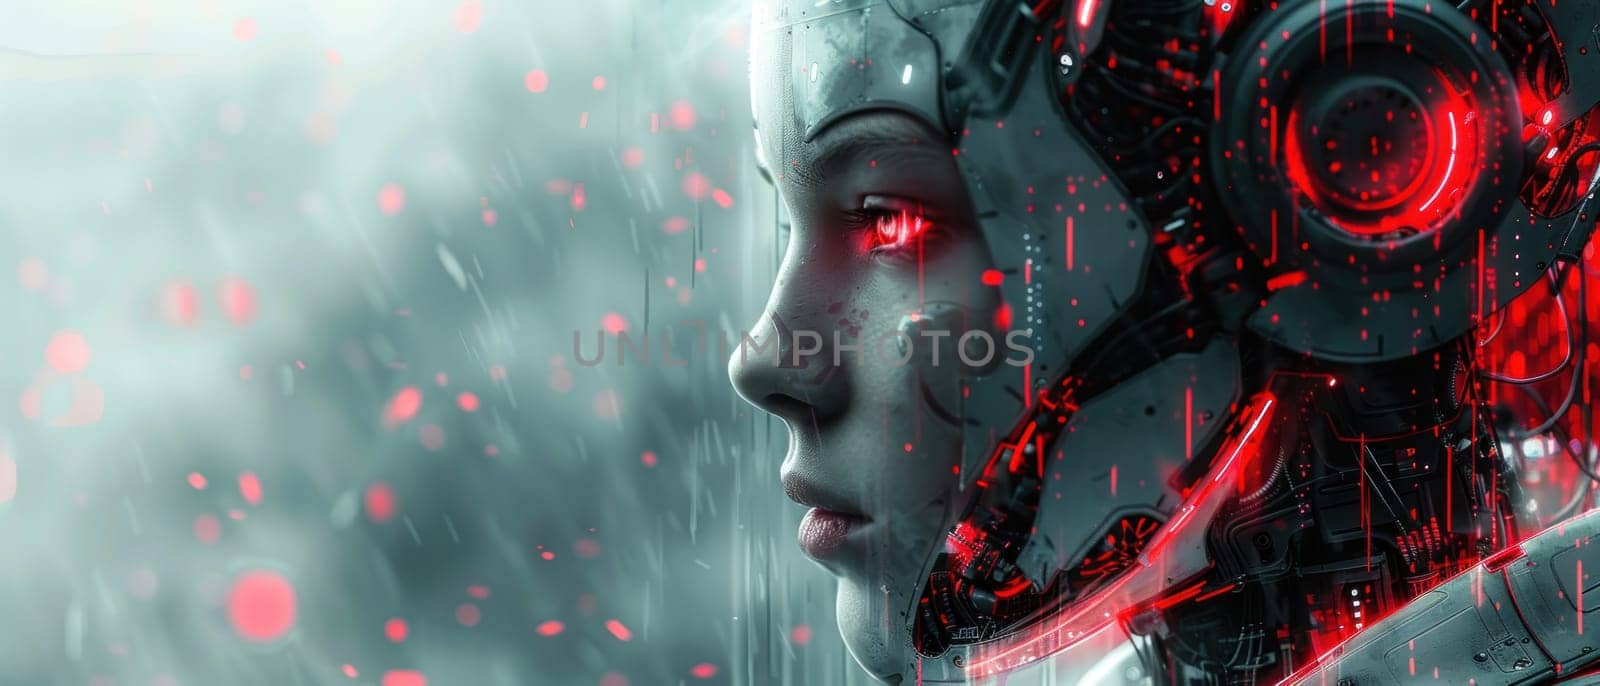 A cyborg face is covered in glowing red sparks by golfmerrymaker